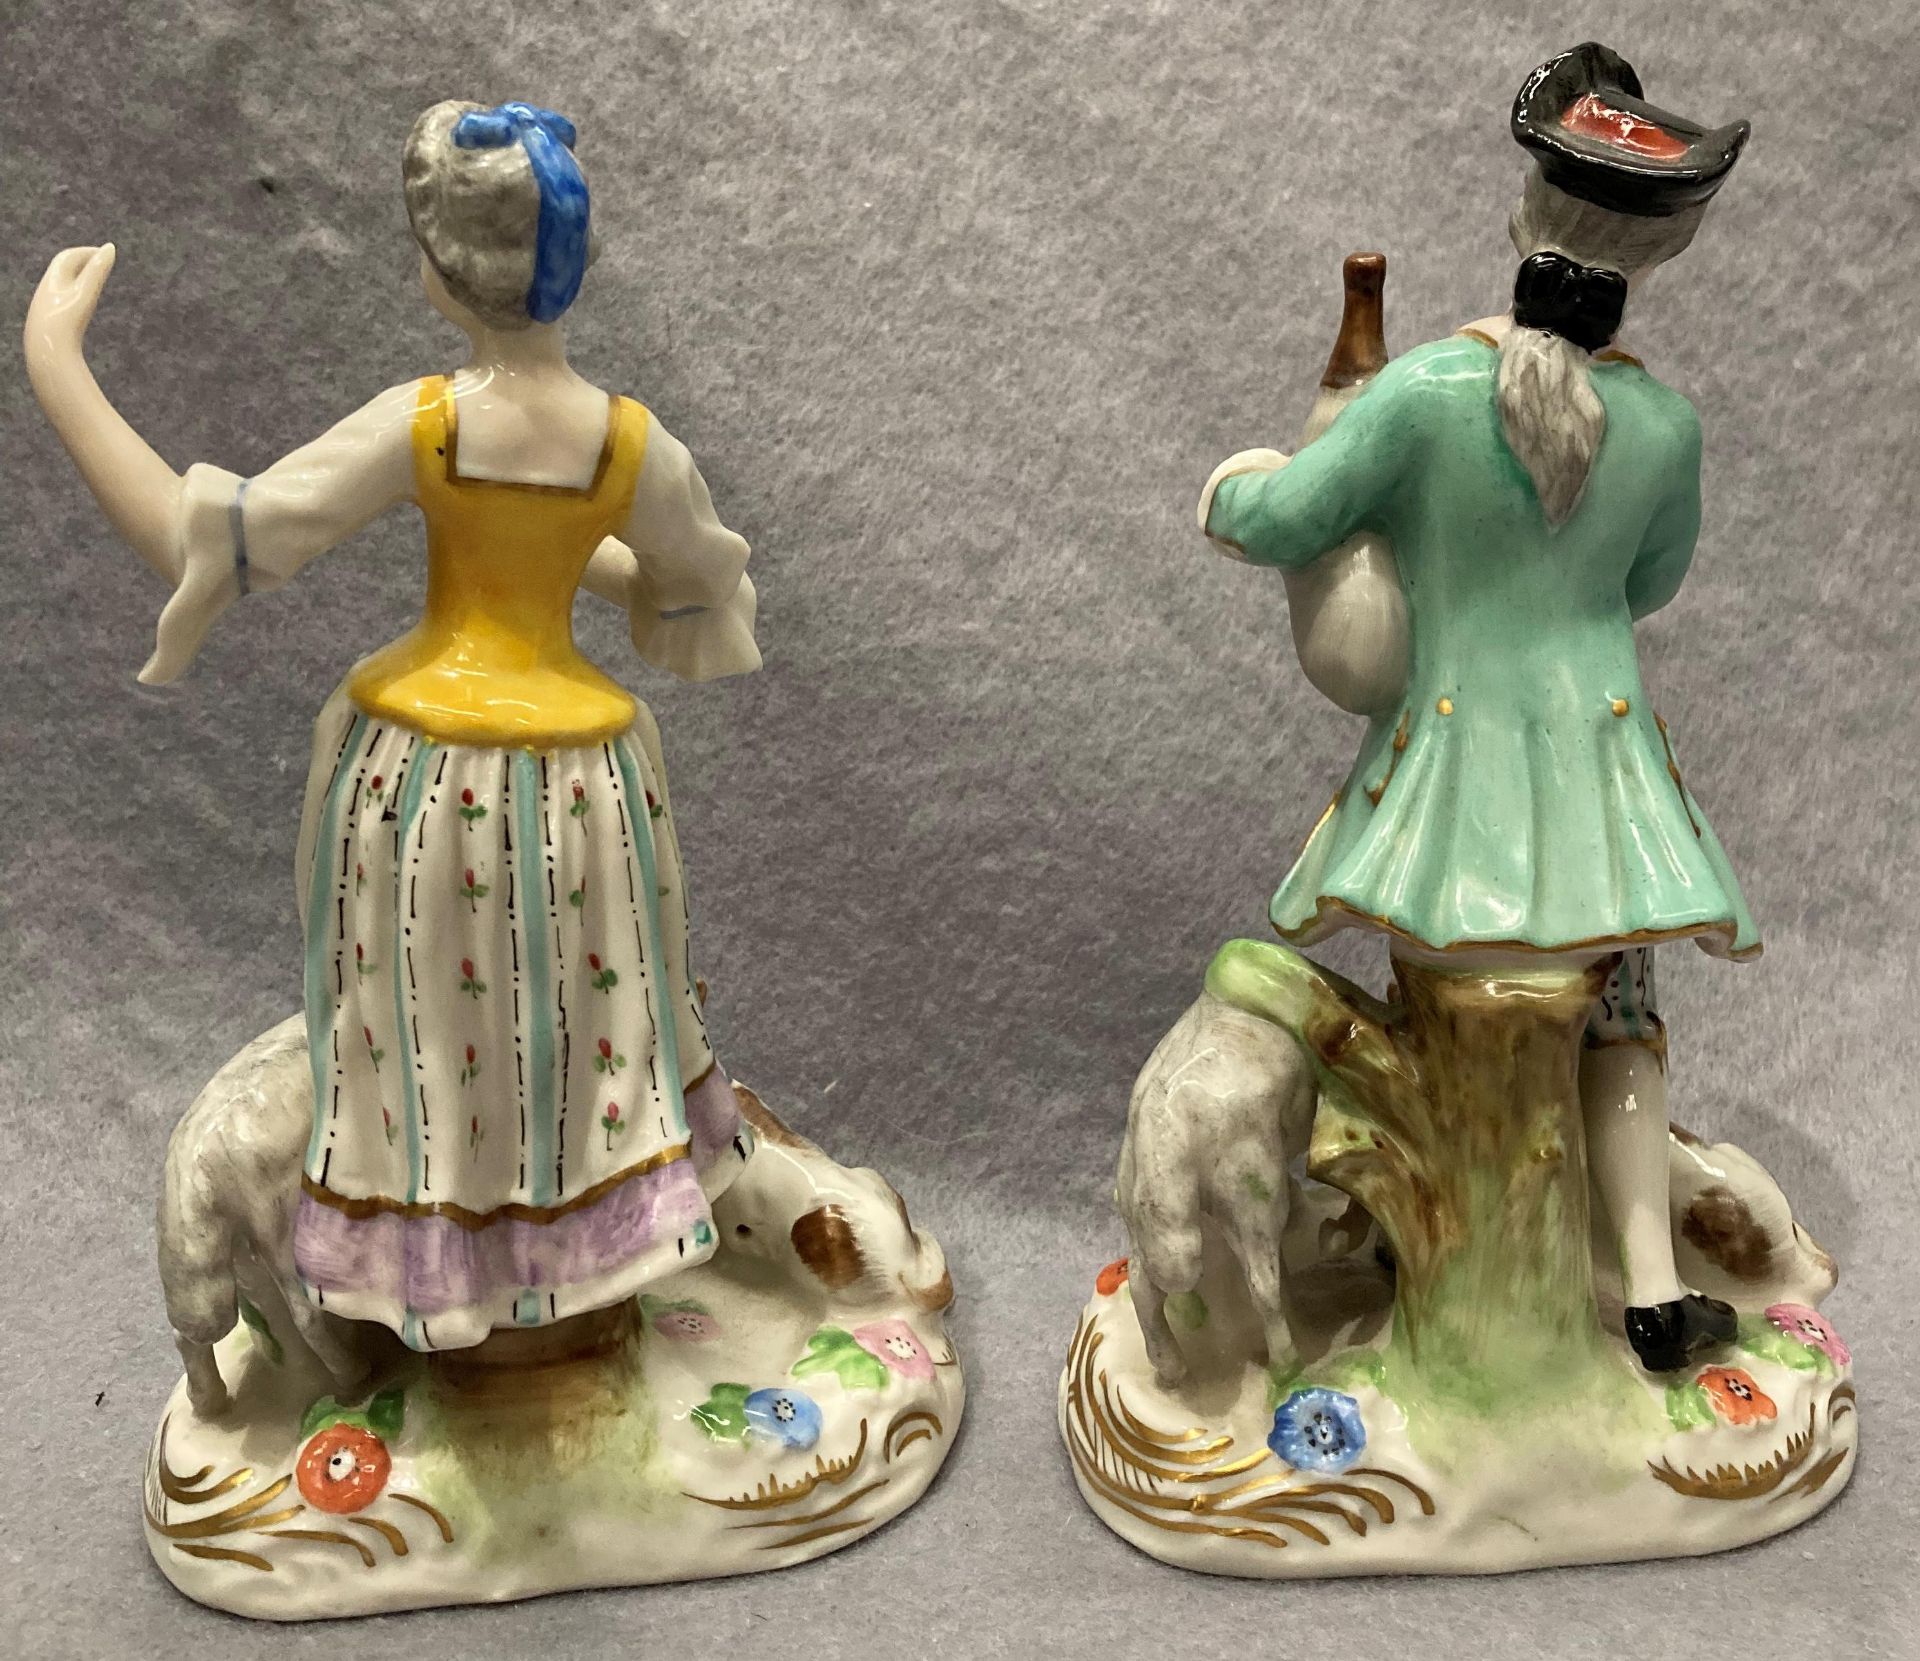 Pair of porcelain figurines, man and woman with animals, damage to the man's animal with bow, - Image 4 of 6